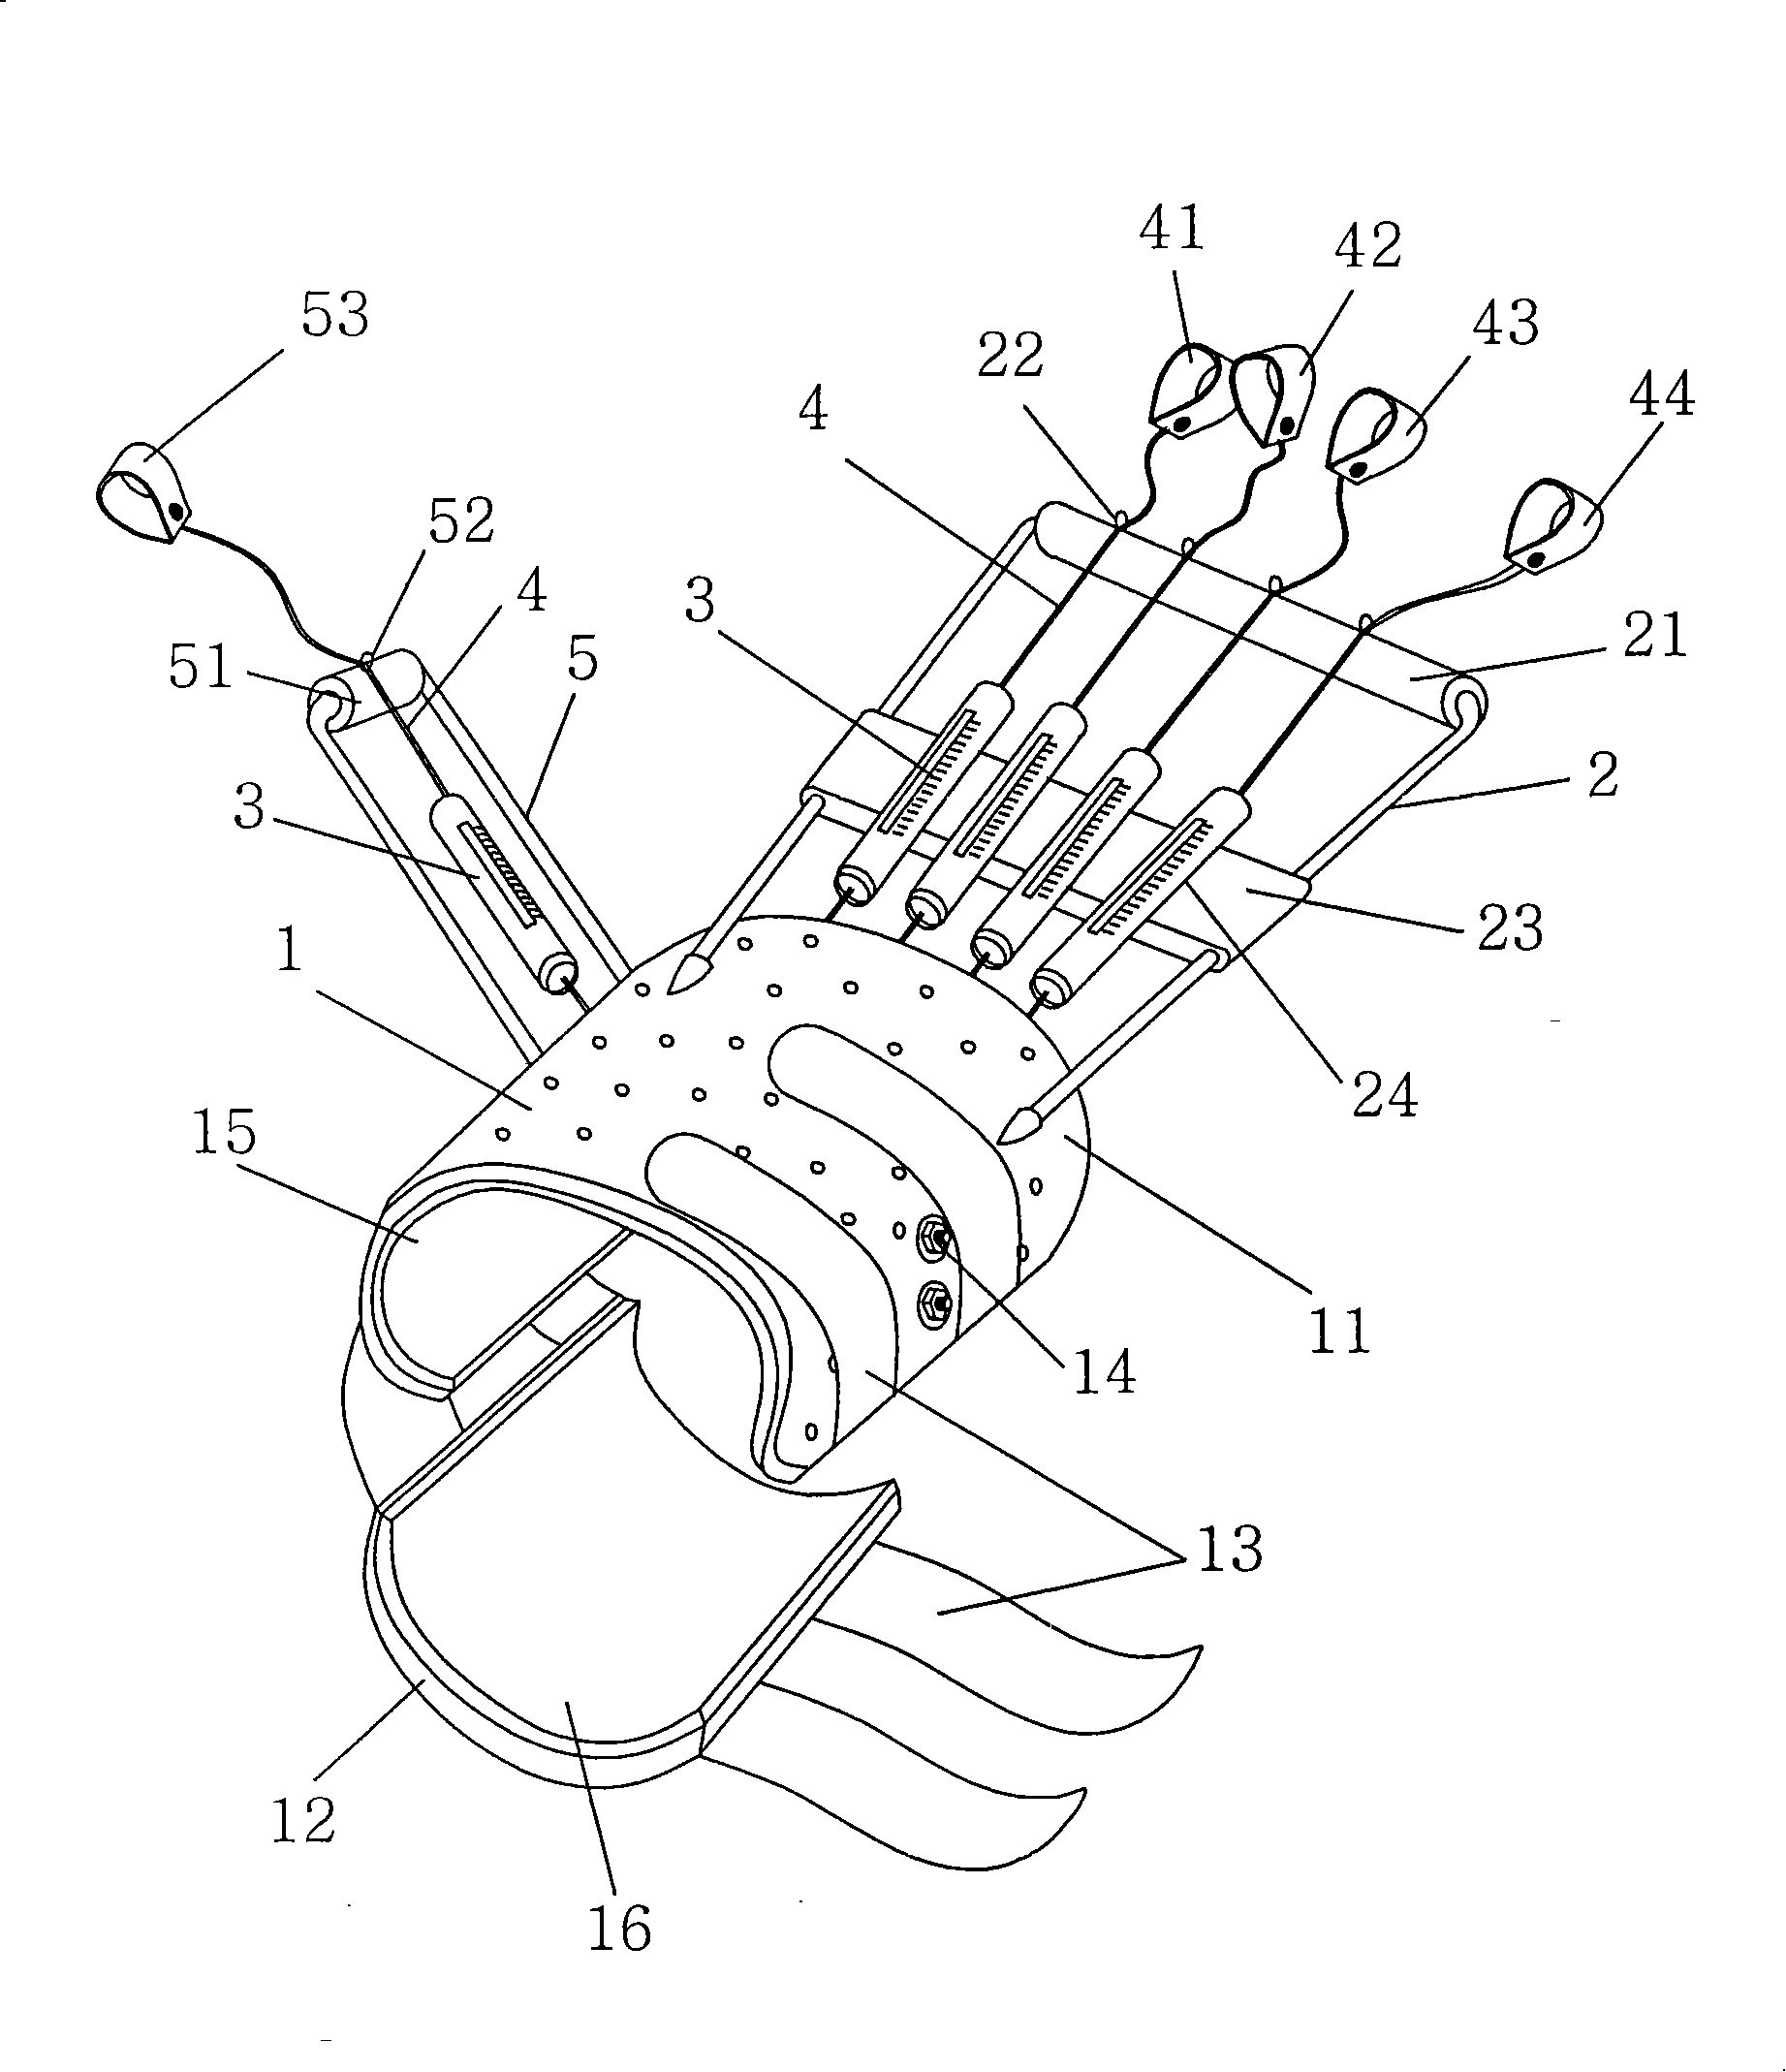 Wrist joints, finger joints mobility metering orthotic device